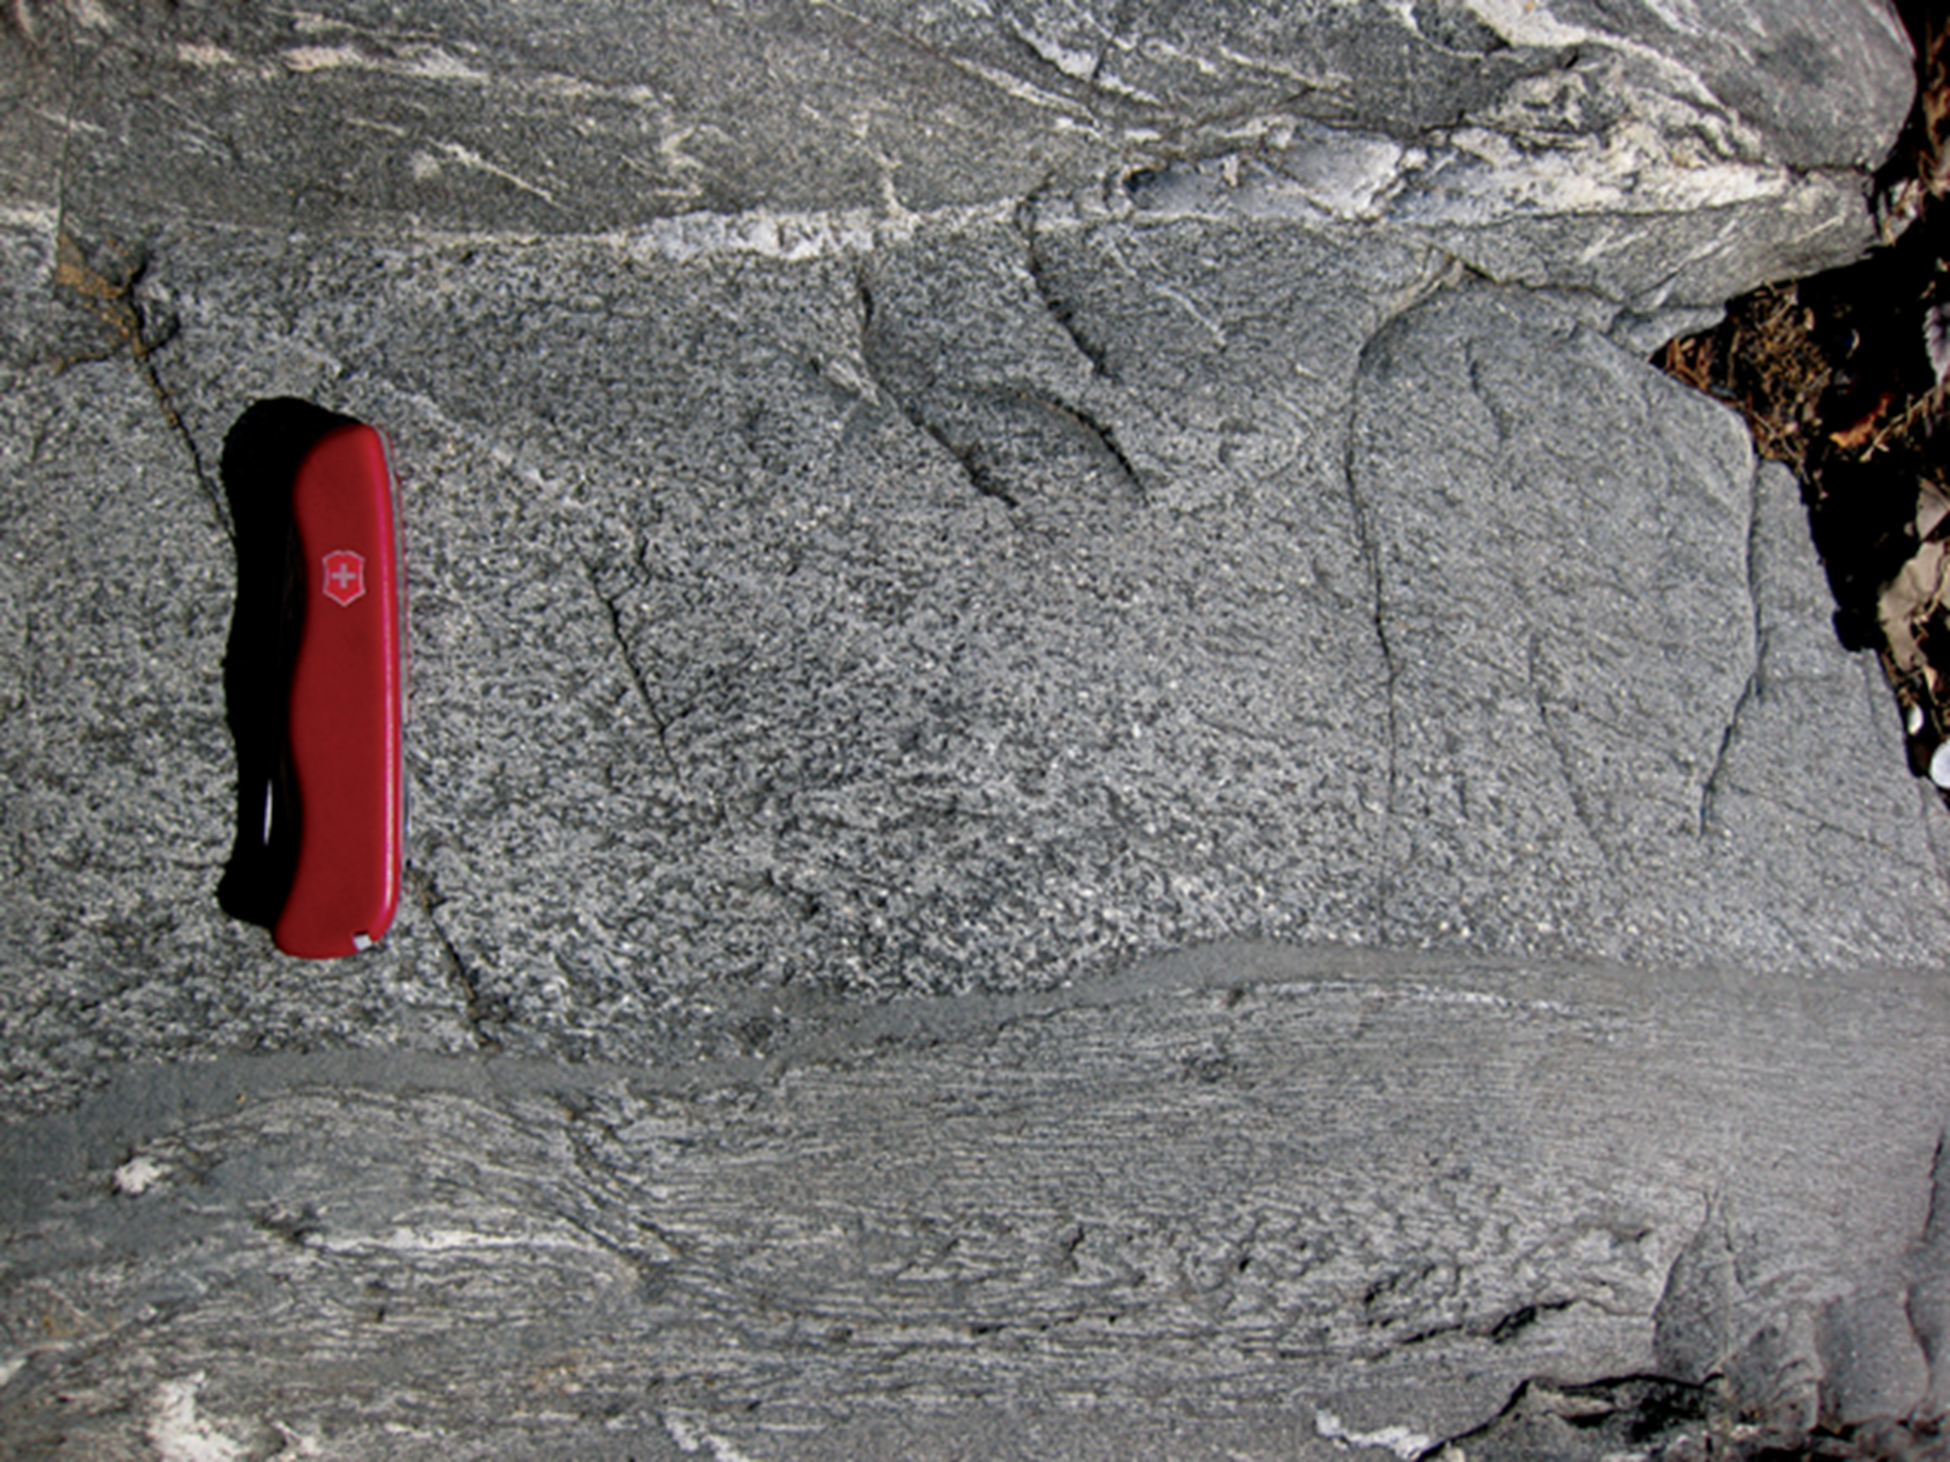 Photograph showing a graded bed in lightly-metamorphosed meta-turbidites. Some quartz veins are also present. A pocket knife provides a sense of scale: the graded bed is about 20 cm thick.